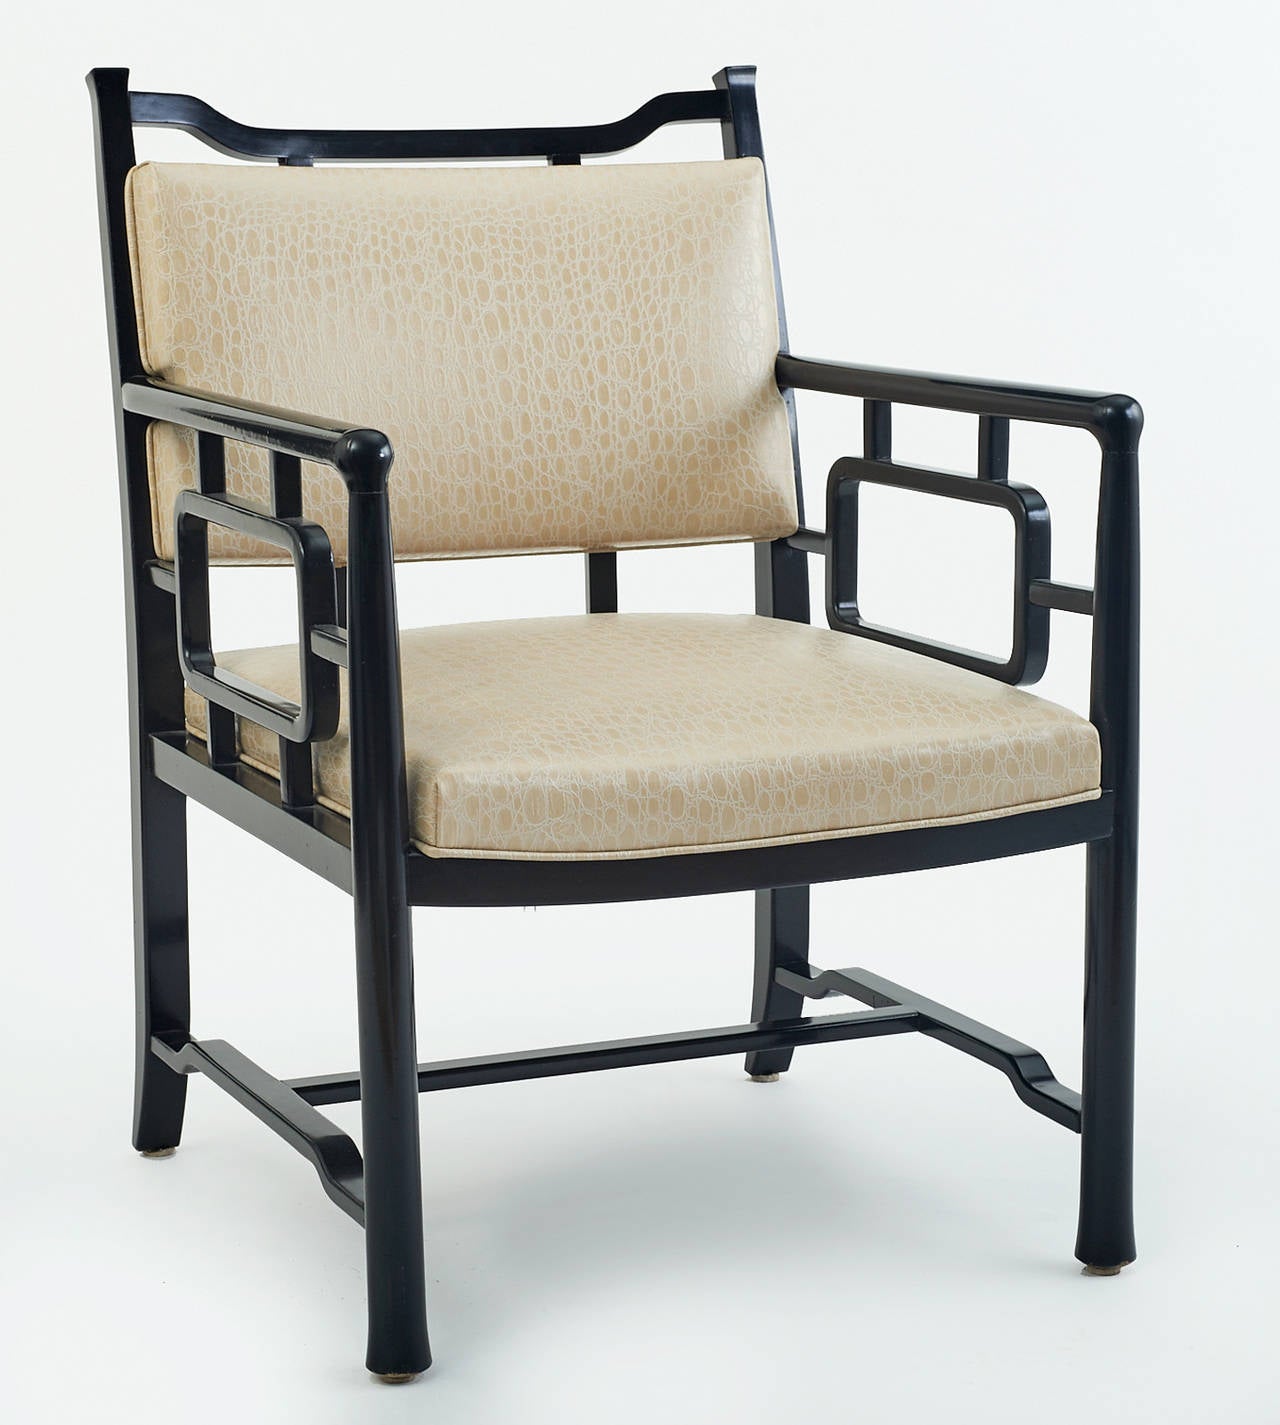 You are viewing an extremely rare pair of custom designed, circa 1945 open armed Asian inspired chairs by Paul Laszlo. These chairs were originally purchased back in 2006 or 2007 from a California residence, and possibly have been there since 1945.